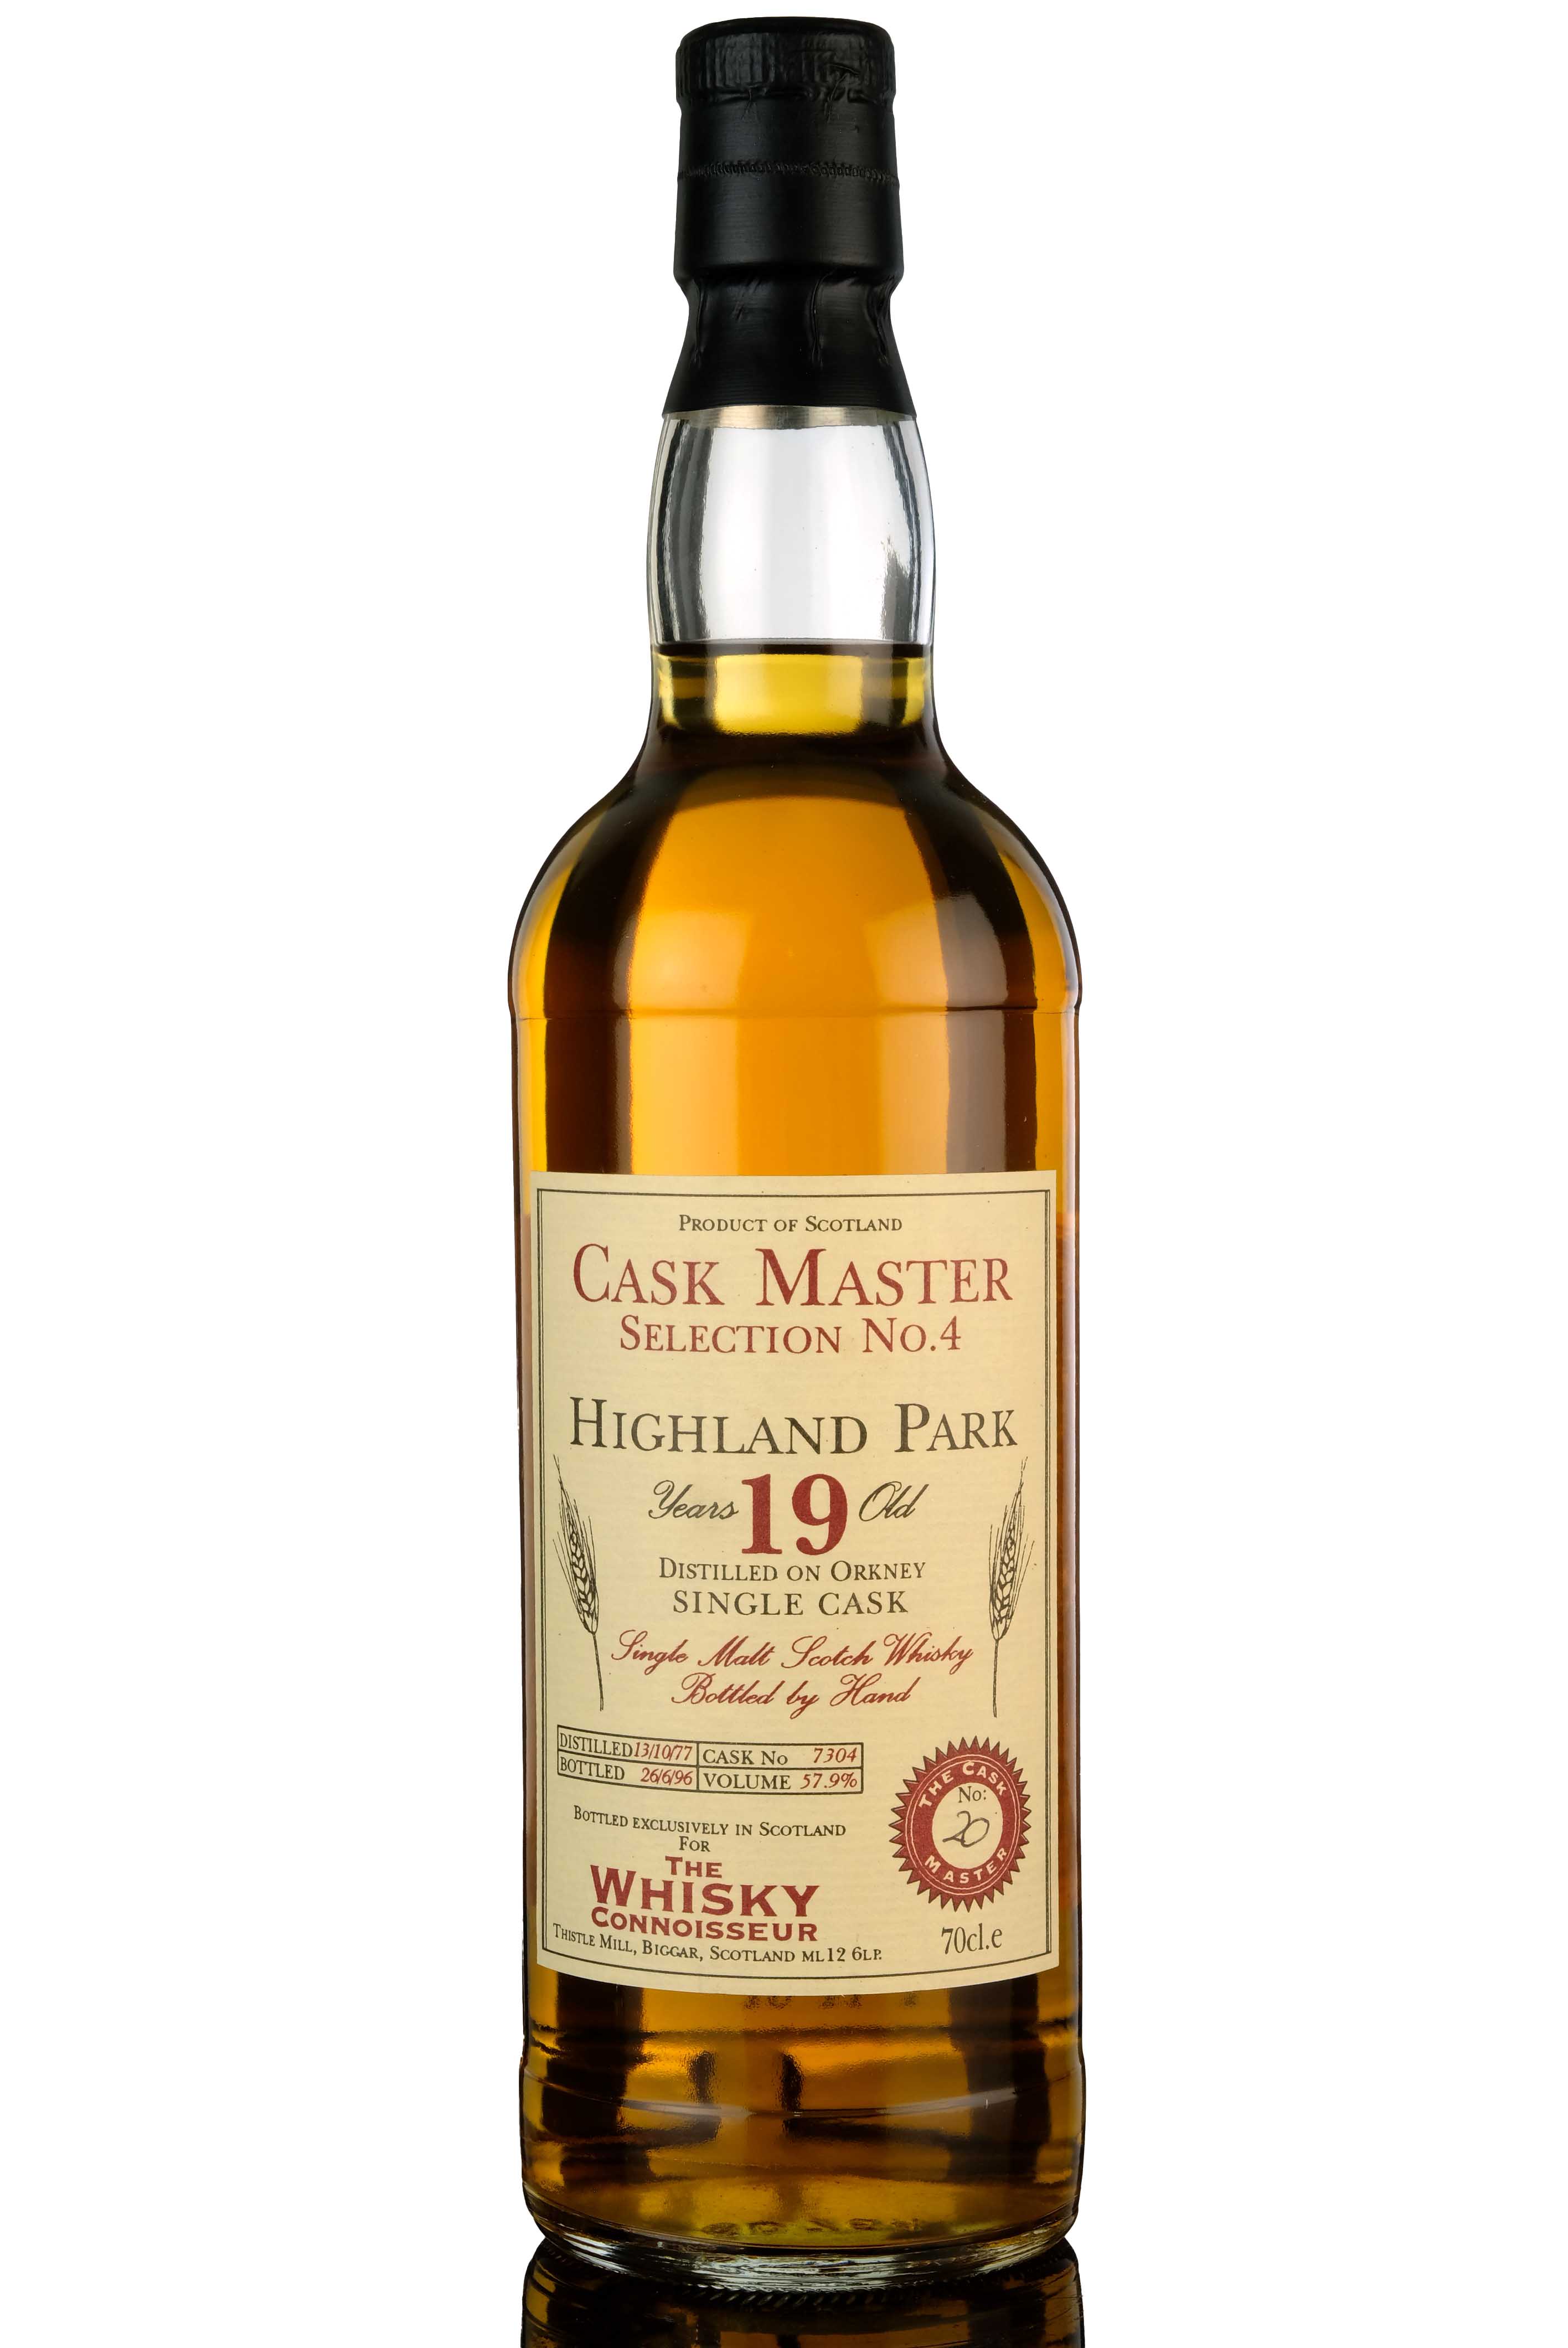 Highland Park 1977-1996 - 19 Year Old - The Whisky Connoisseur Cask Master - Single Cask 7